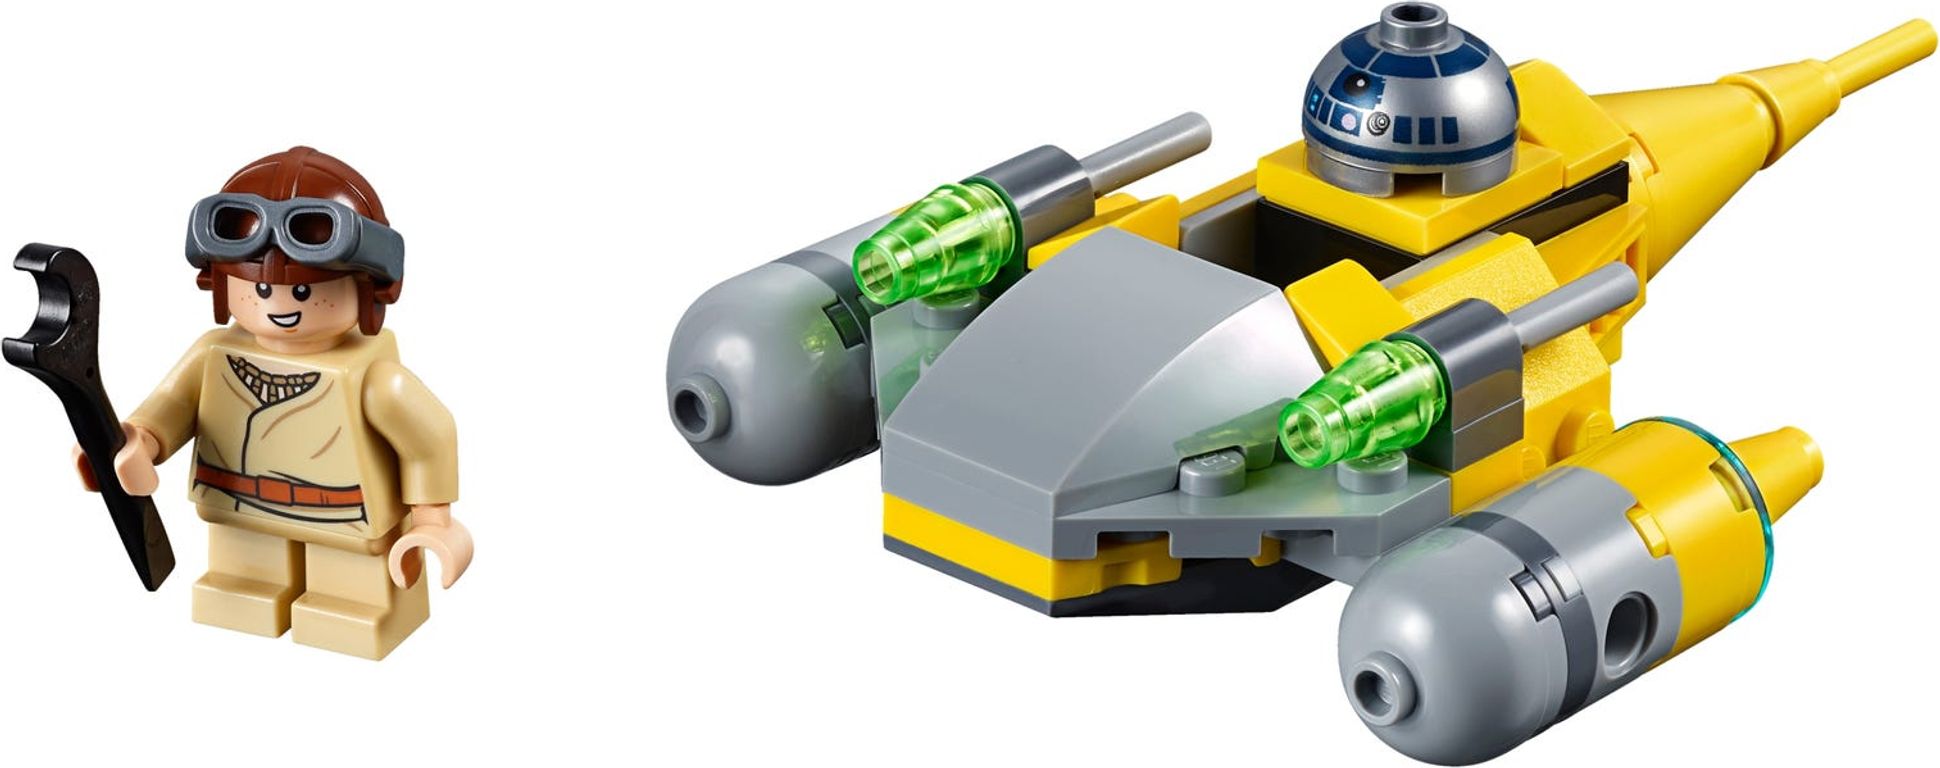 LEGO® Star Wars Naboo Starfighter™ Microfighter components